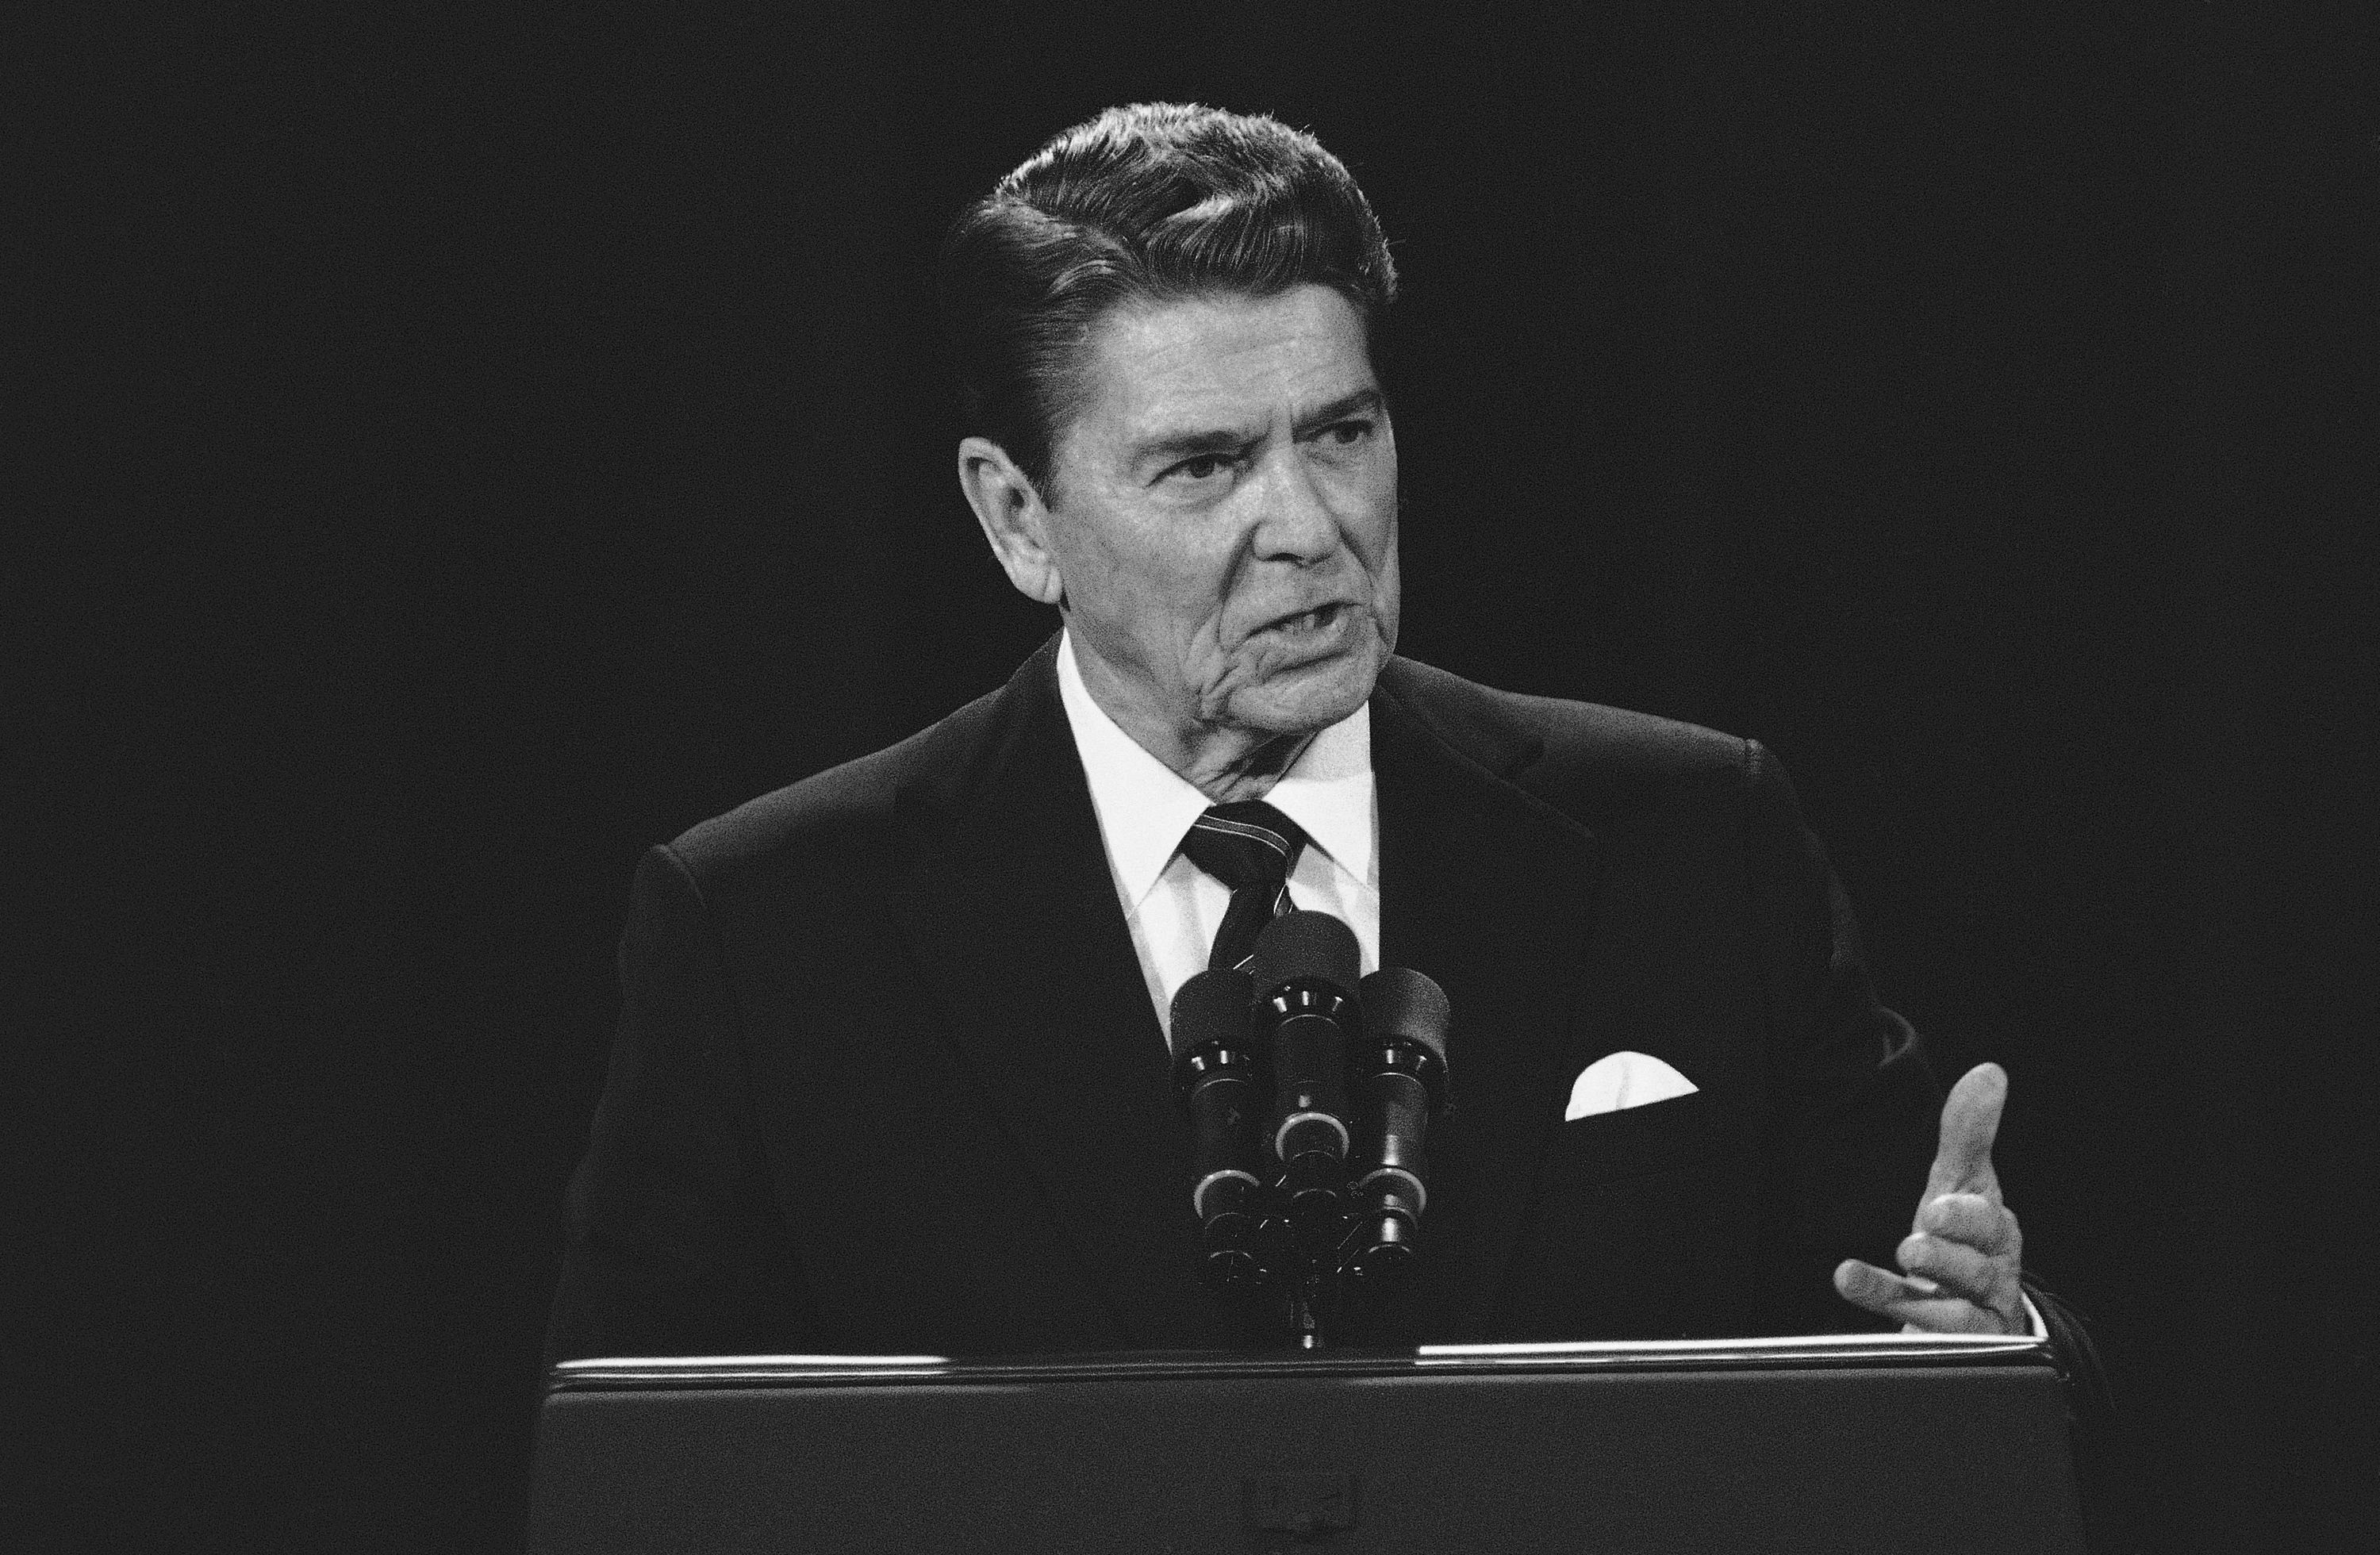 Reagan makes a joke about his age during a debate with against Mondale on October 8, 1984